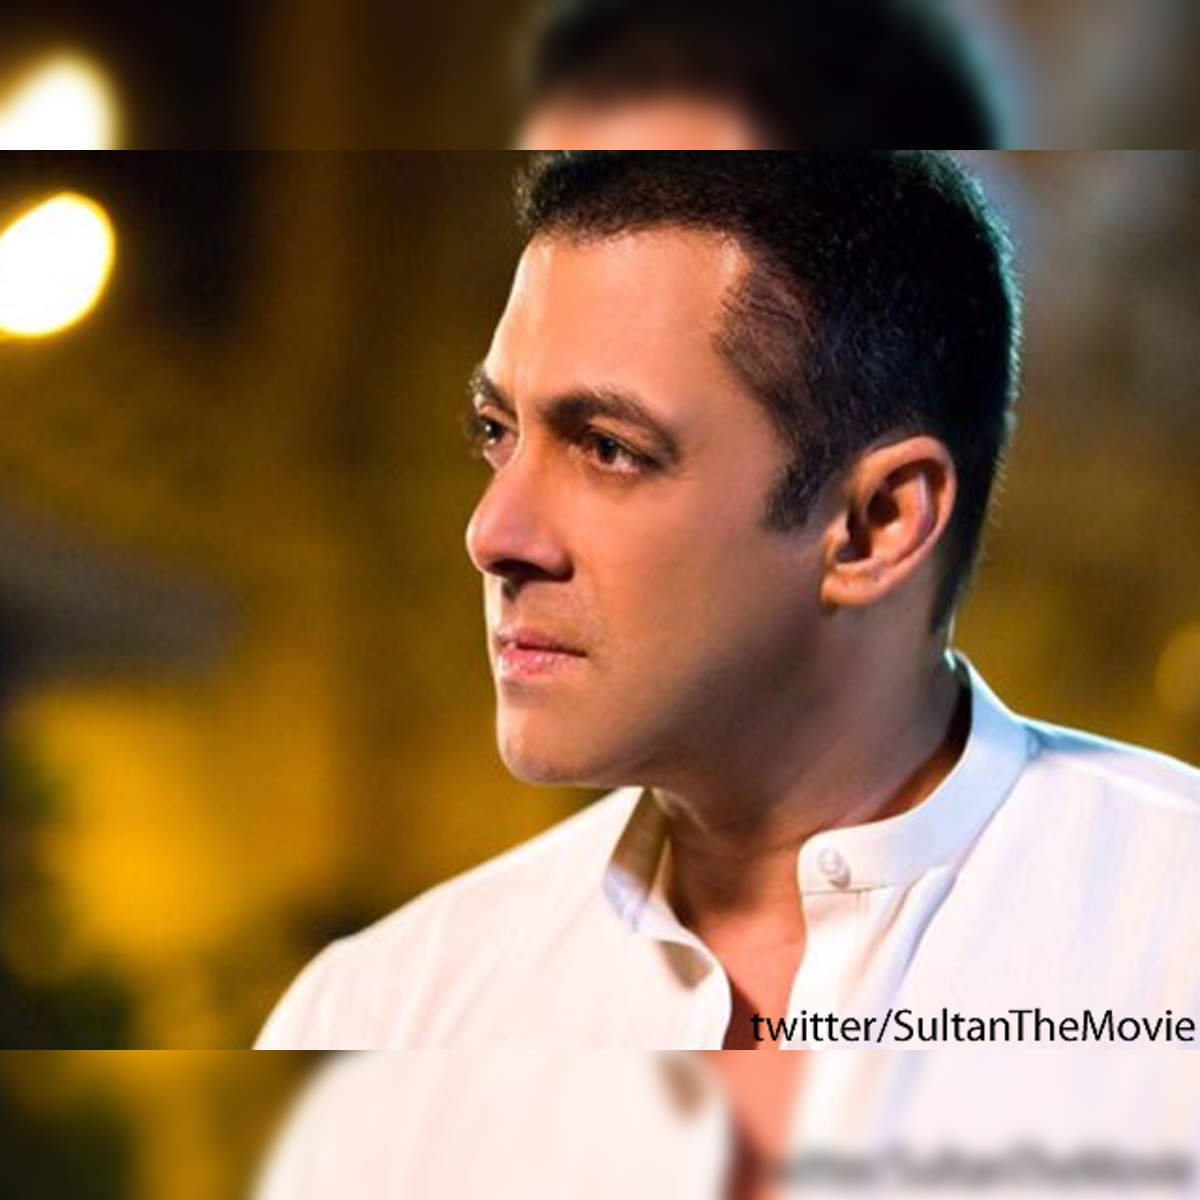 VIDEO) First Look : Salman Khan New Haircut For Tubelight - YouTube